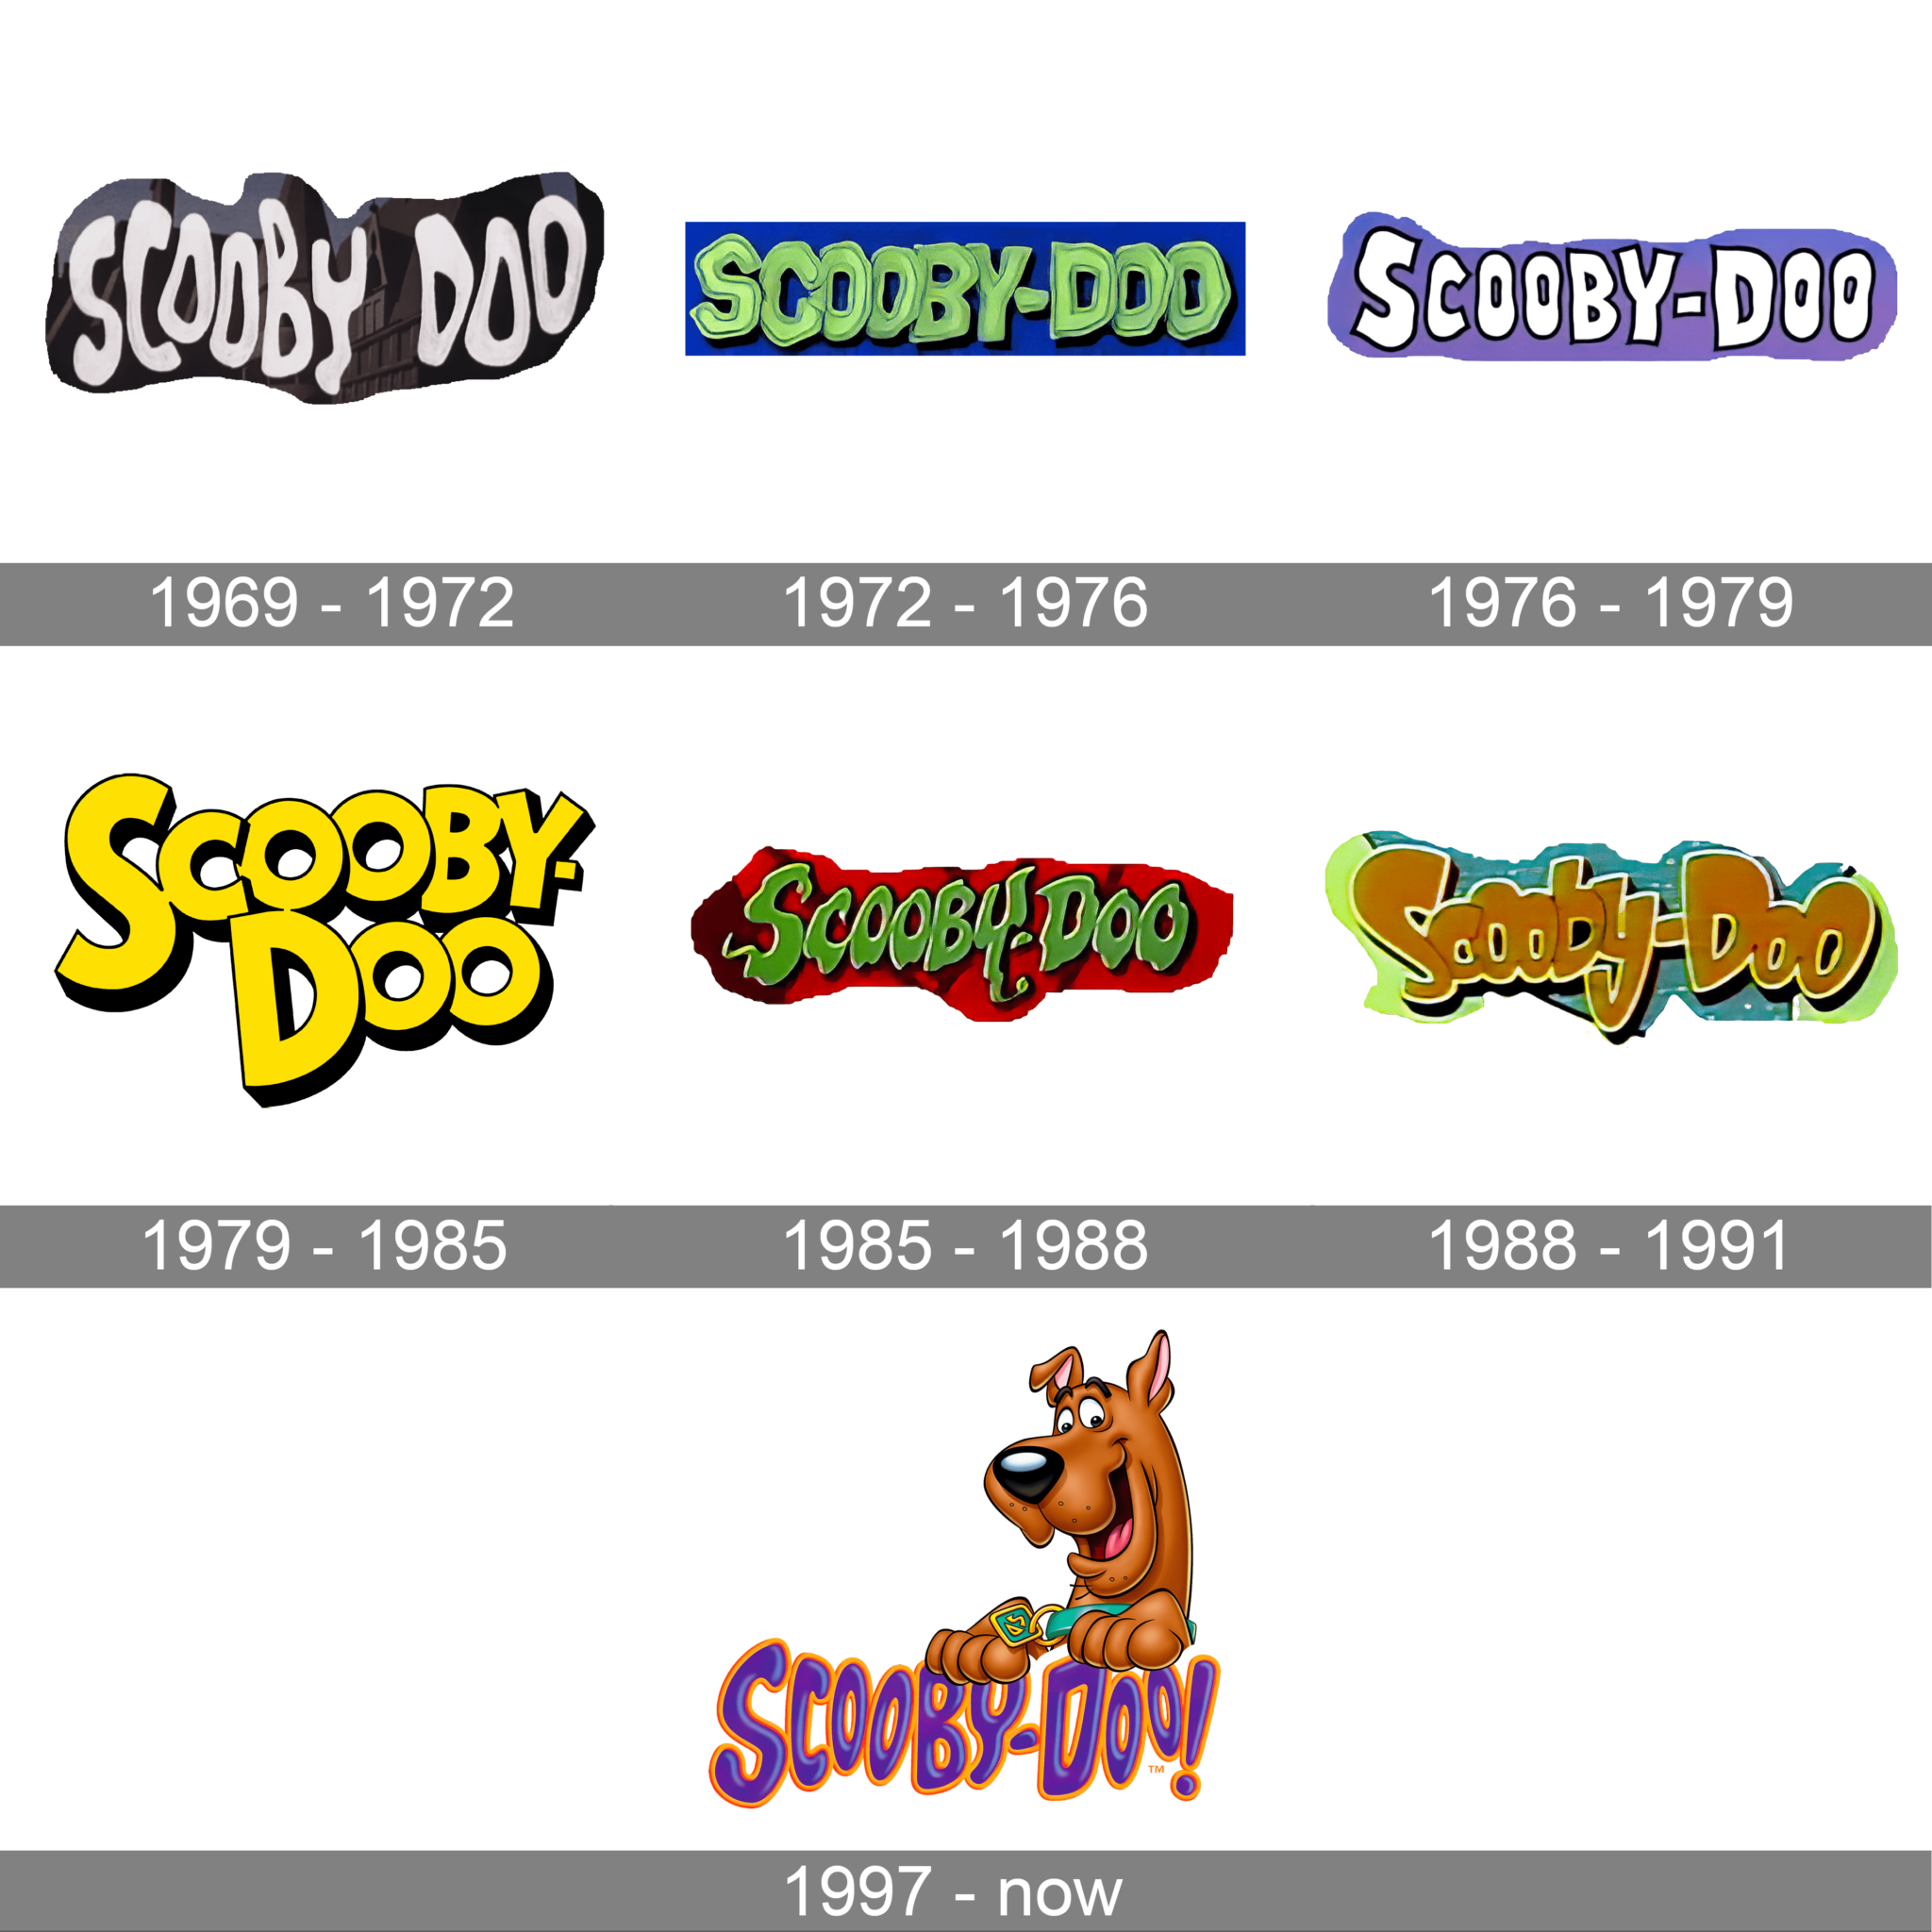 Scooby Doo Logo and symbol, meaning, history, PNG, brand